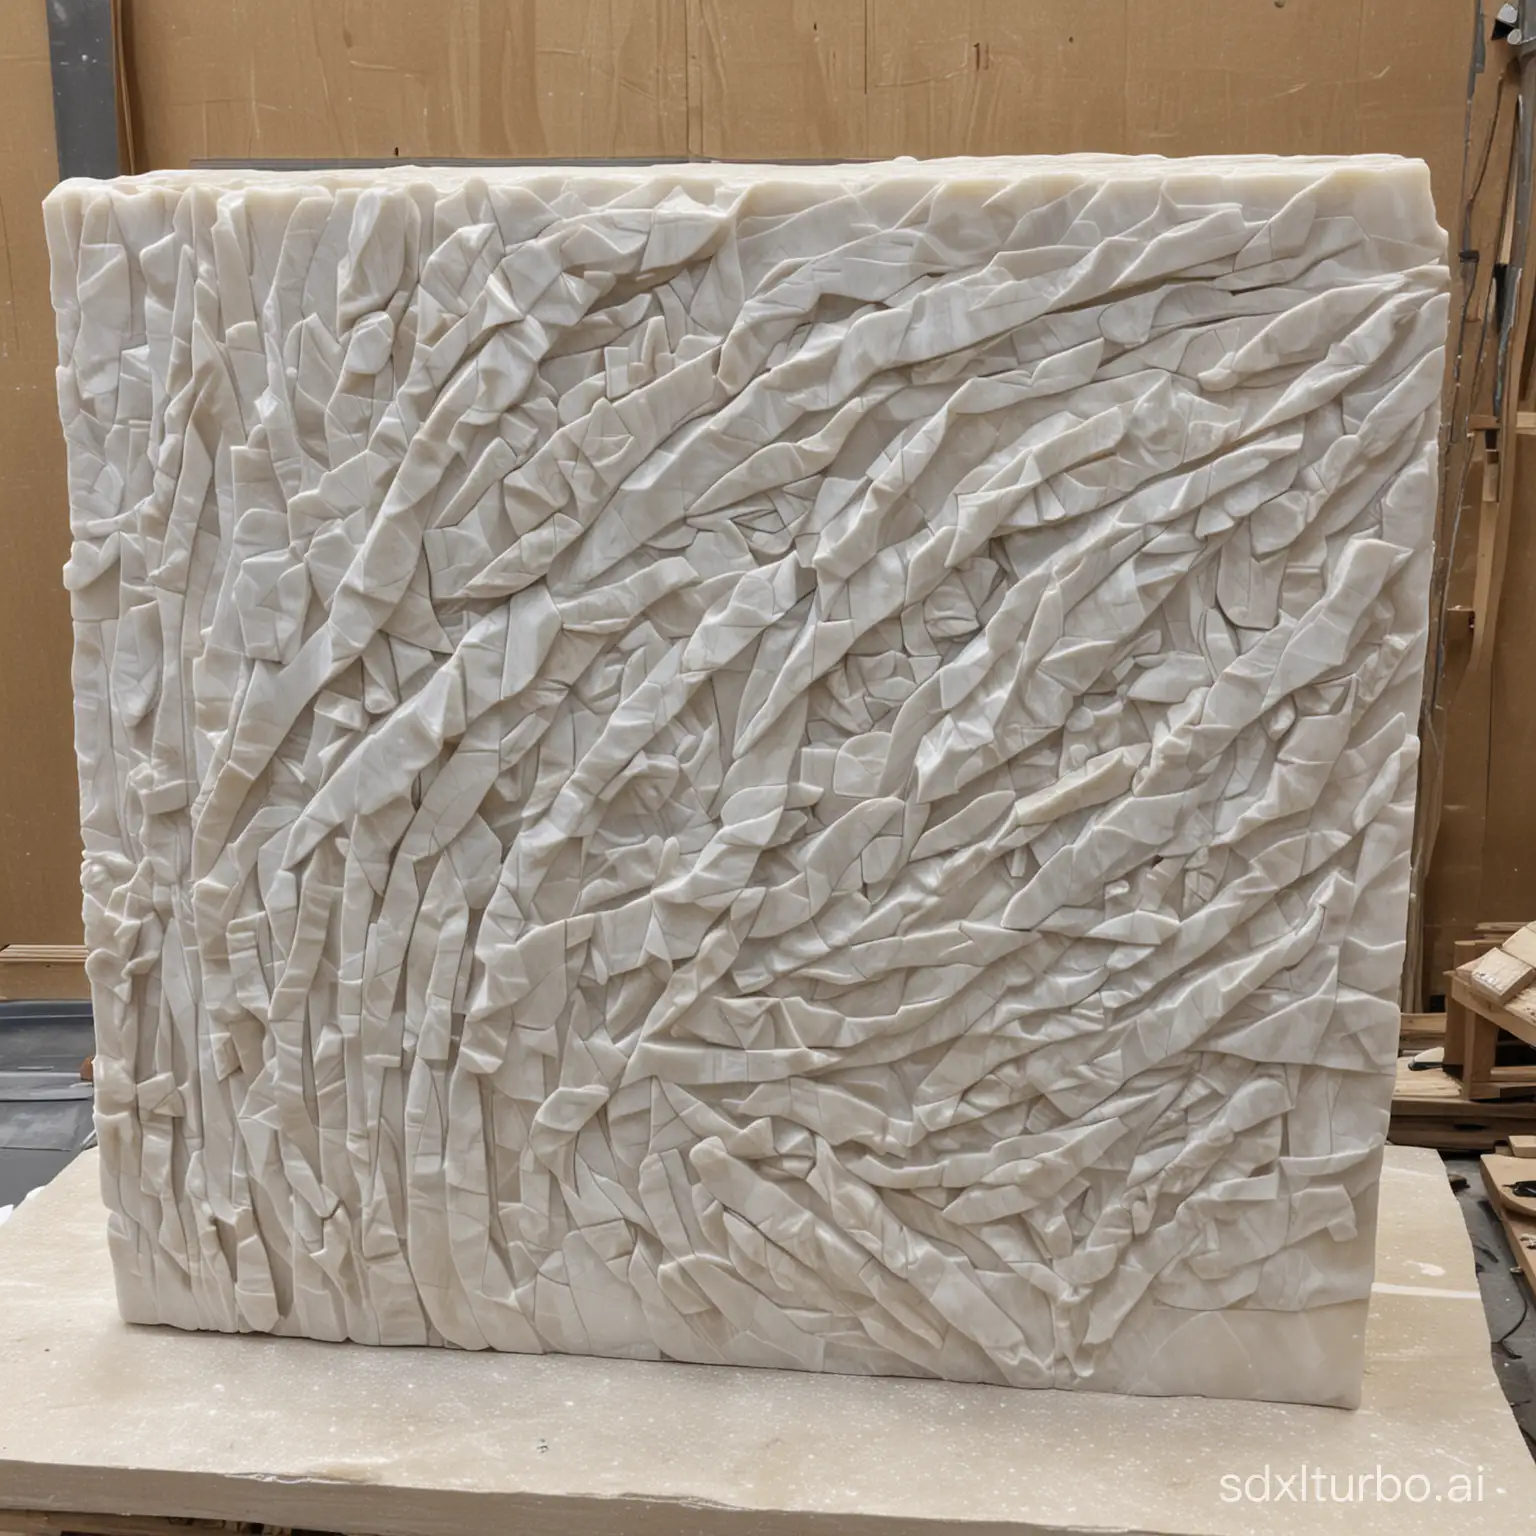 Intricate-Sculpture-Unveiled-Through-Skilled-Chiseling-in-Pristine-Marble